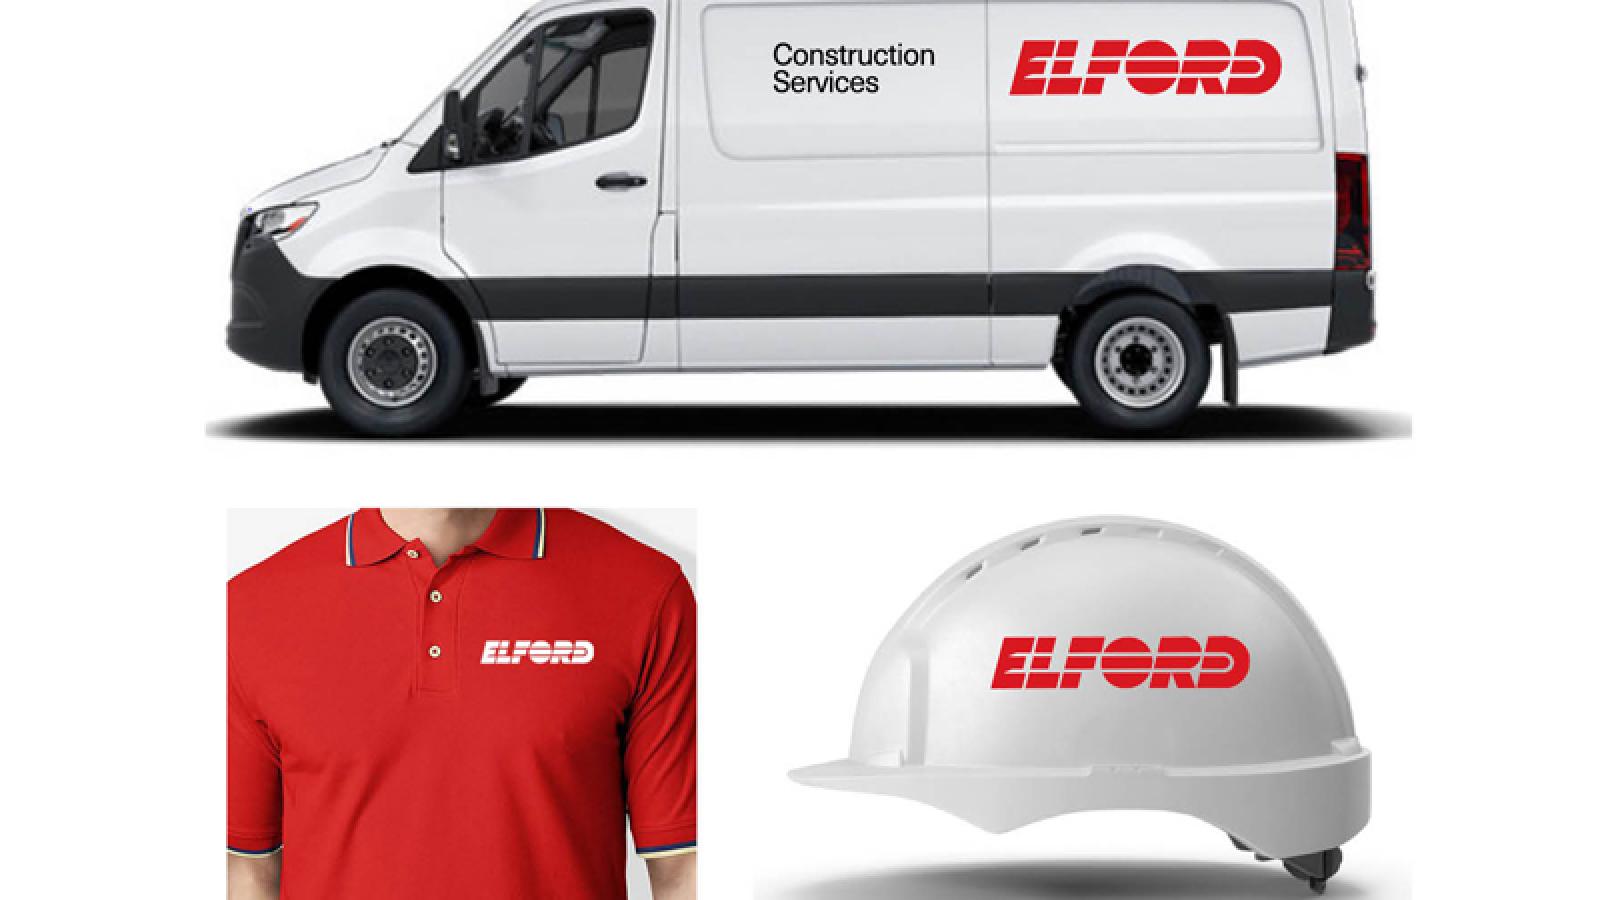 Elford Construction Services brand identity